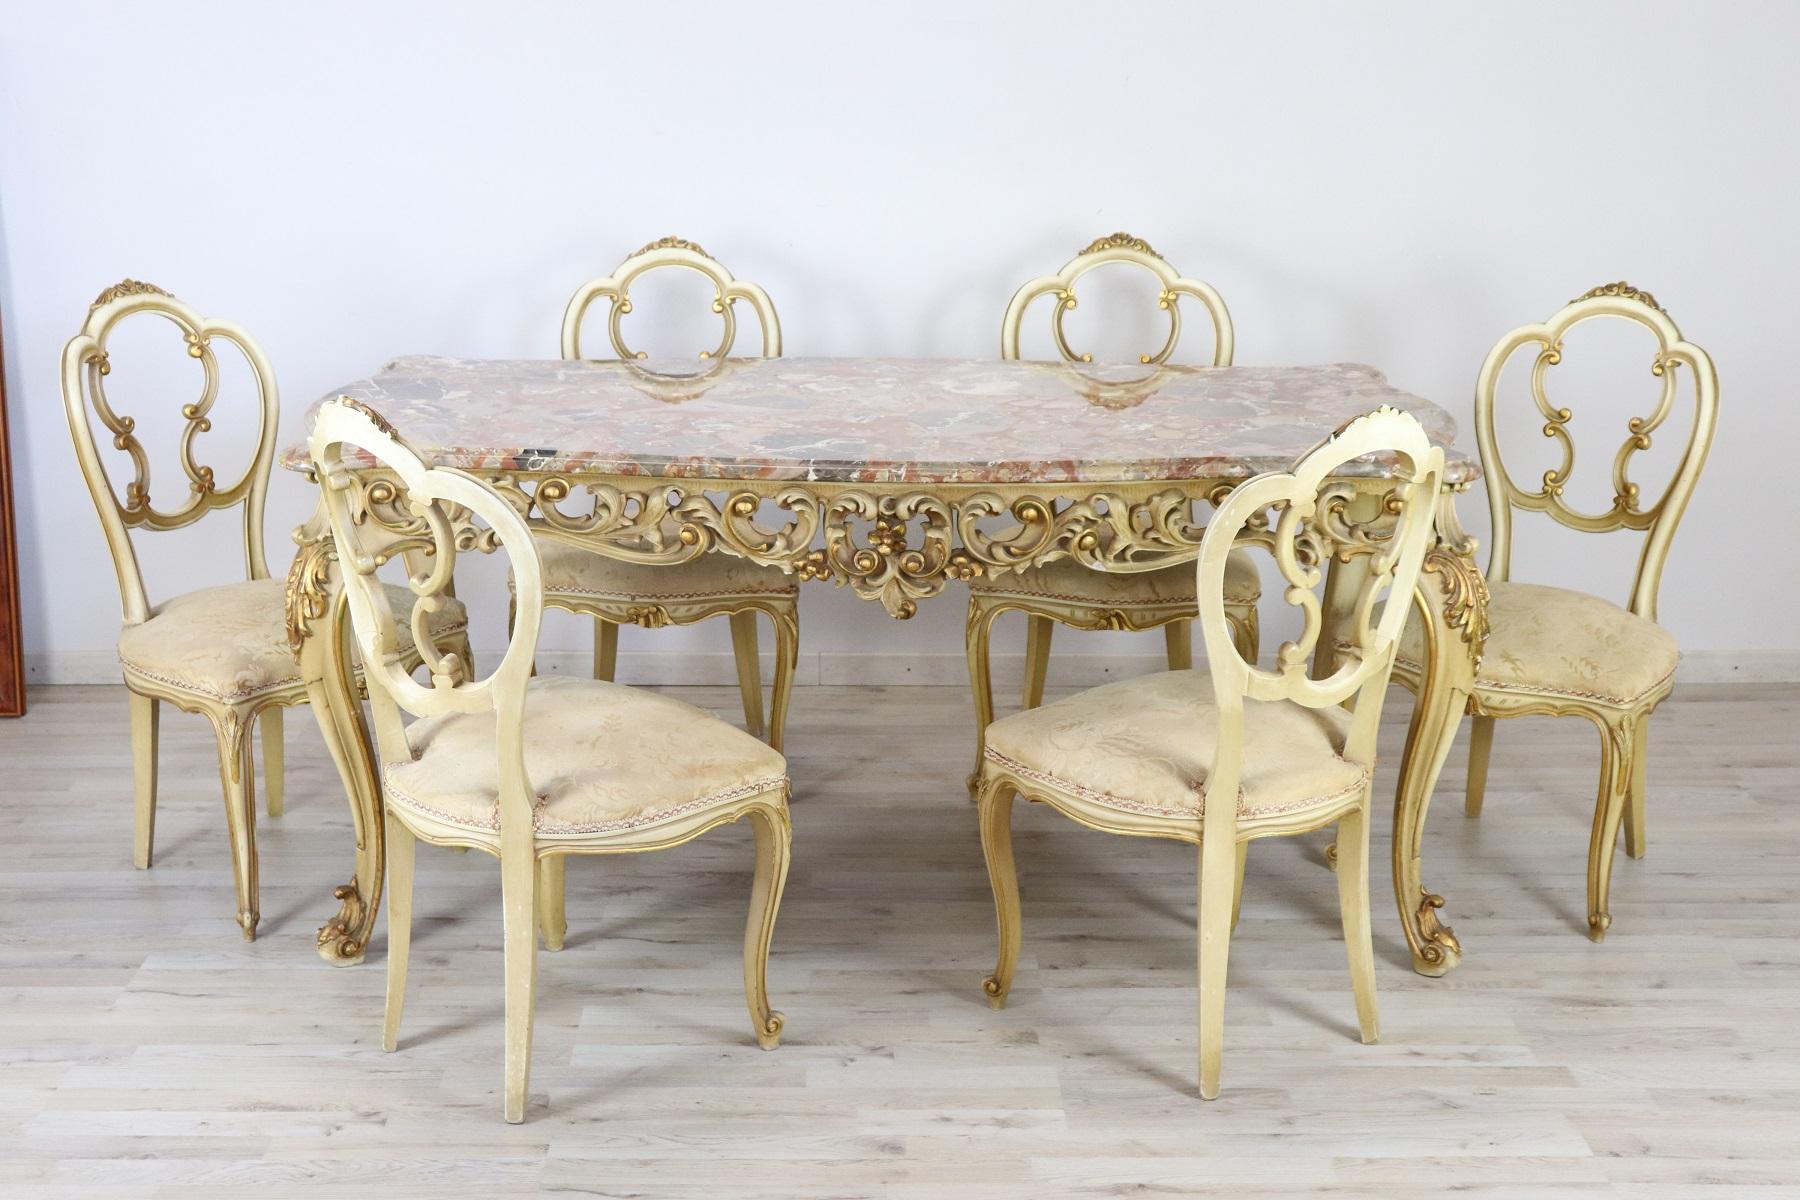 20th Century Italian Baroque Style Carved Lacquered Gilded Wood Dining Table 4